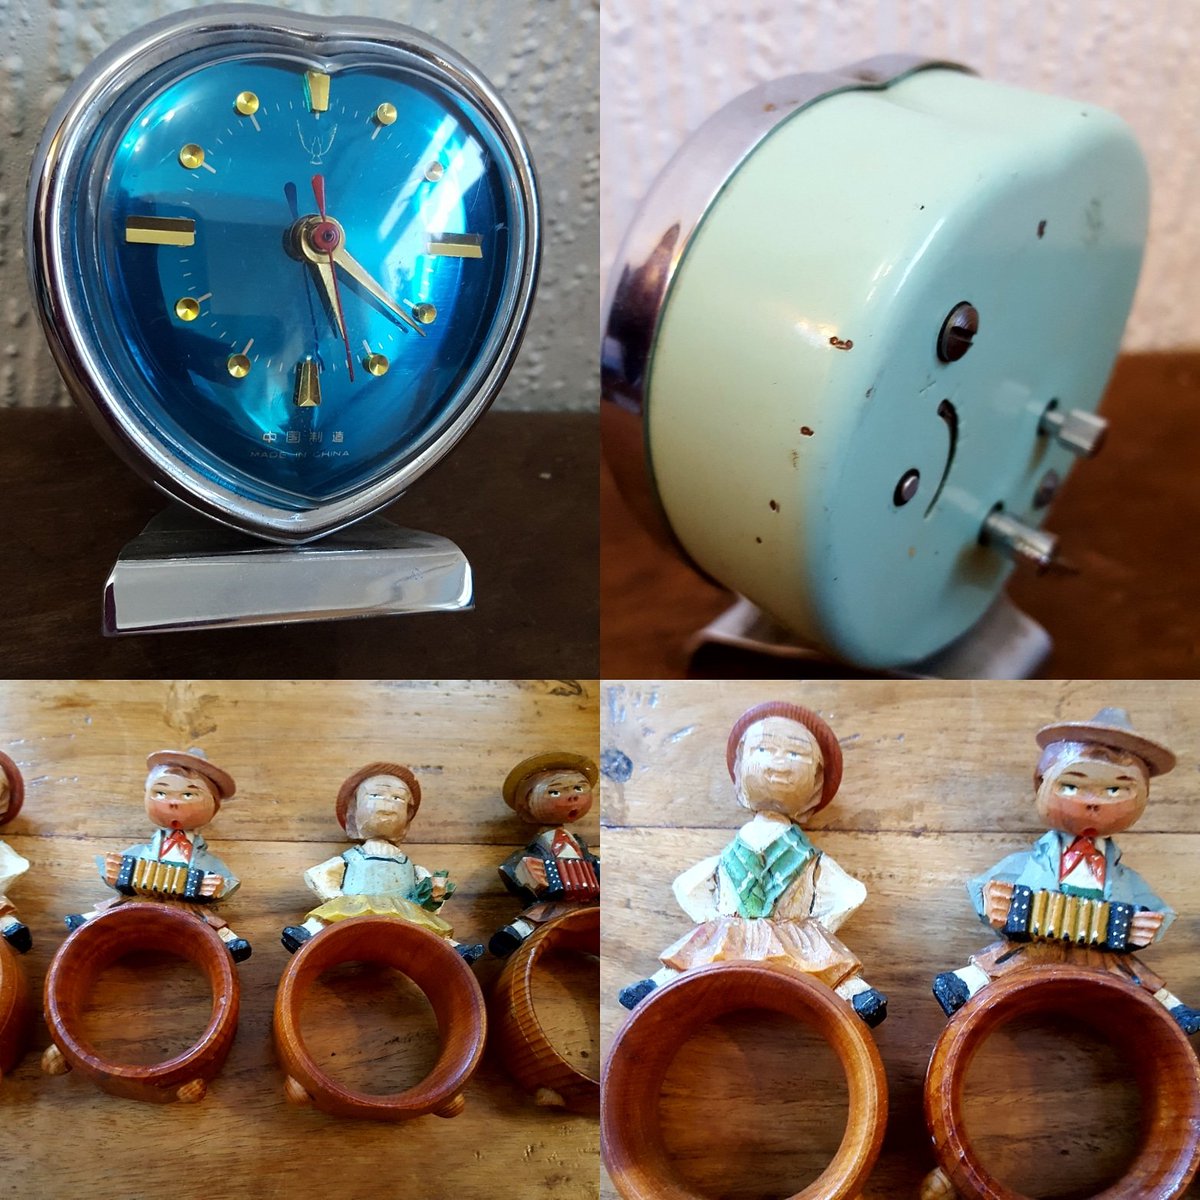 Vintage retro heart Tin plate clock, all working £12 postage £3.95 , vintage black forest napkin rings, bobble head kids, hand carved wood £20 postage £3.95 xxx #vintage #vintageclock #tinplate #campervan #heart #blackforest #handcarved #carvedwood #vintagenapkinrings #retro xxx